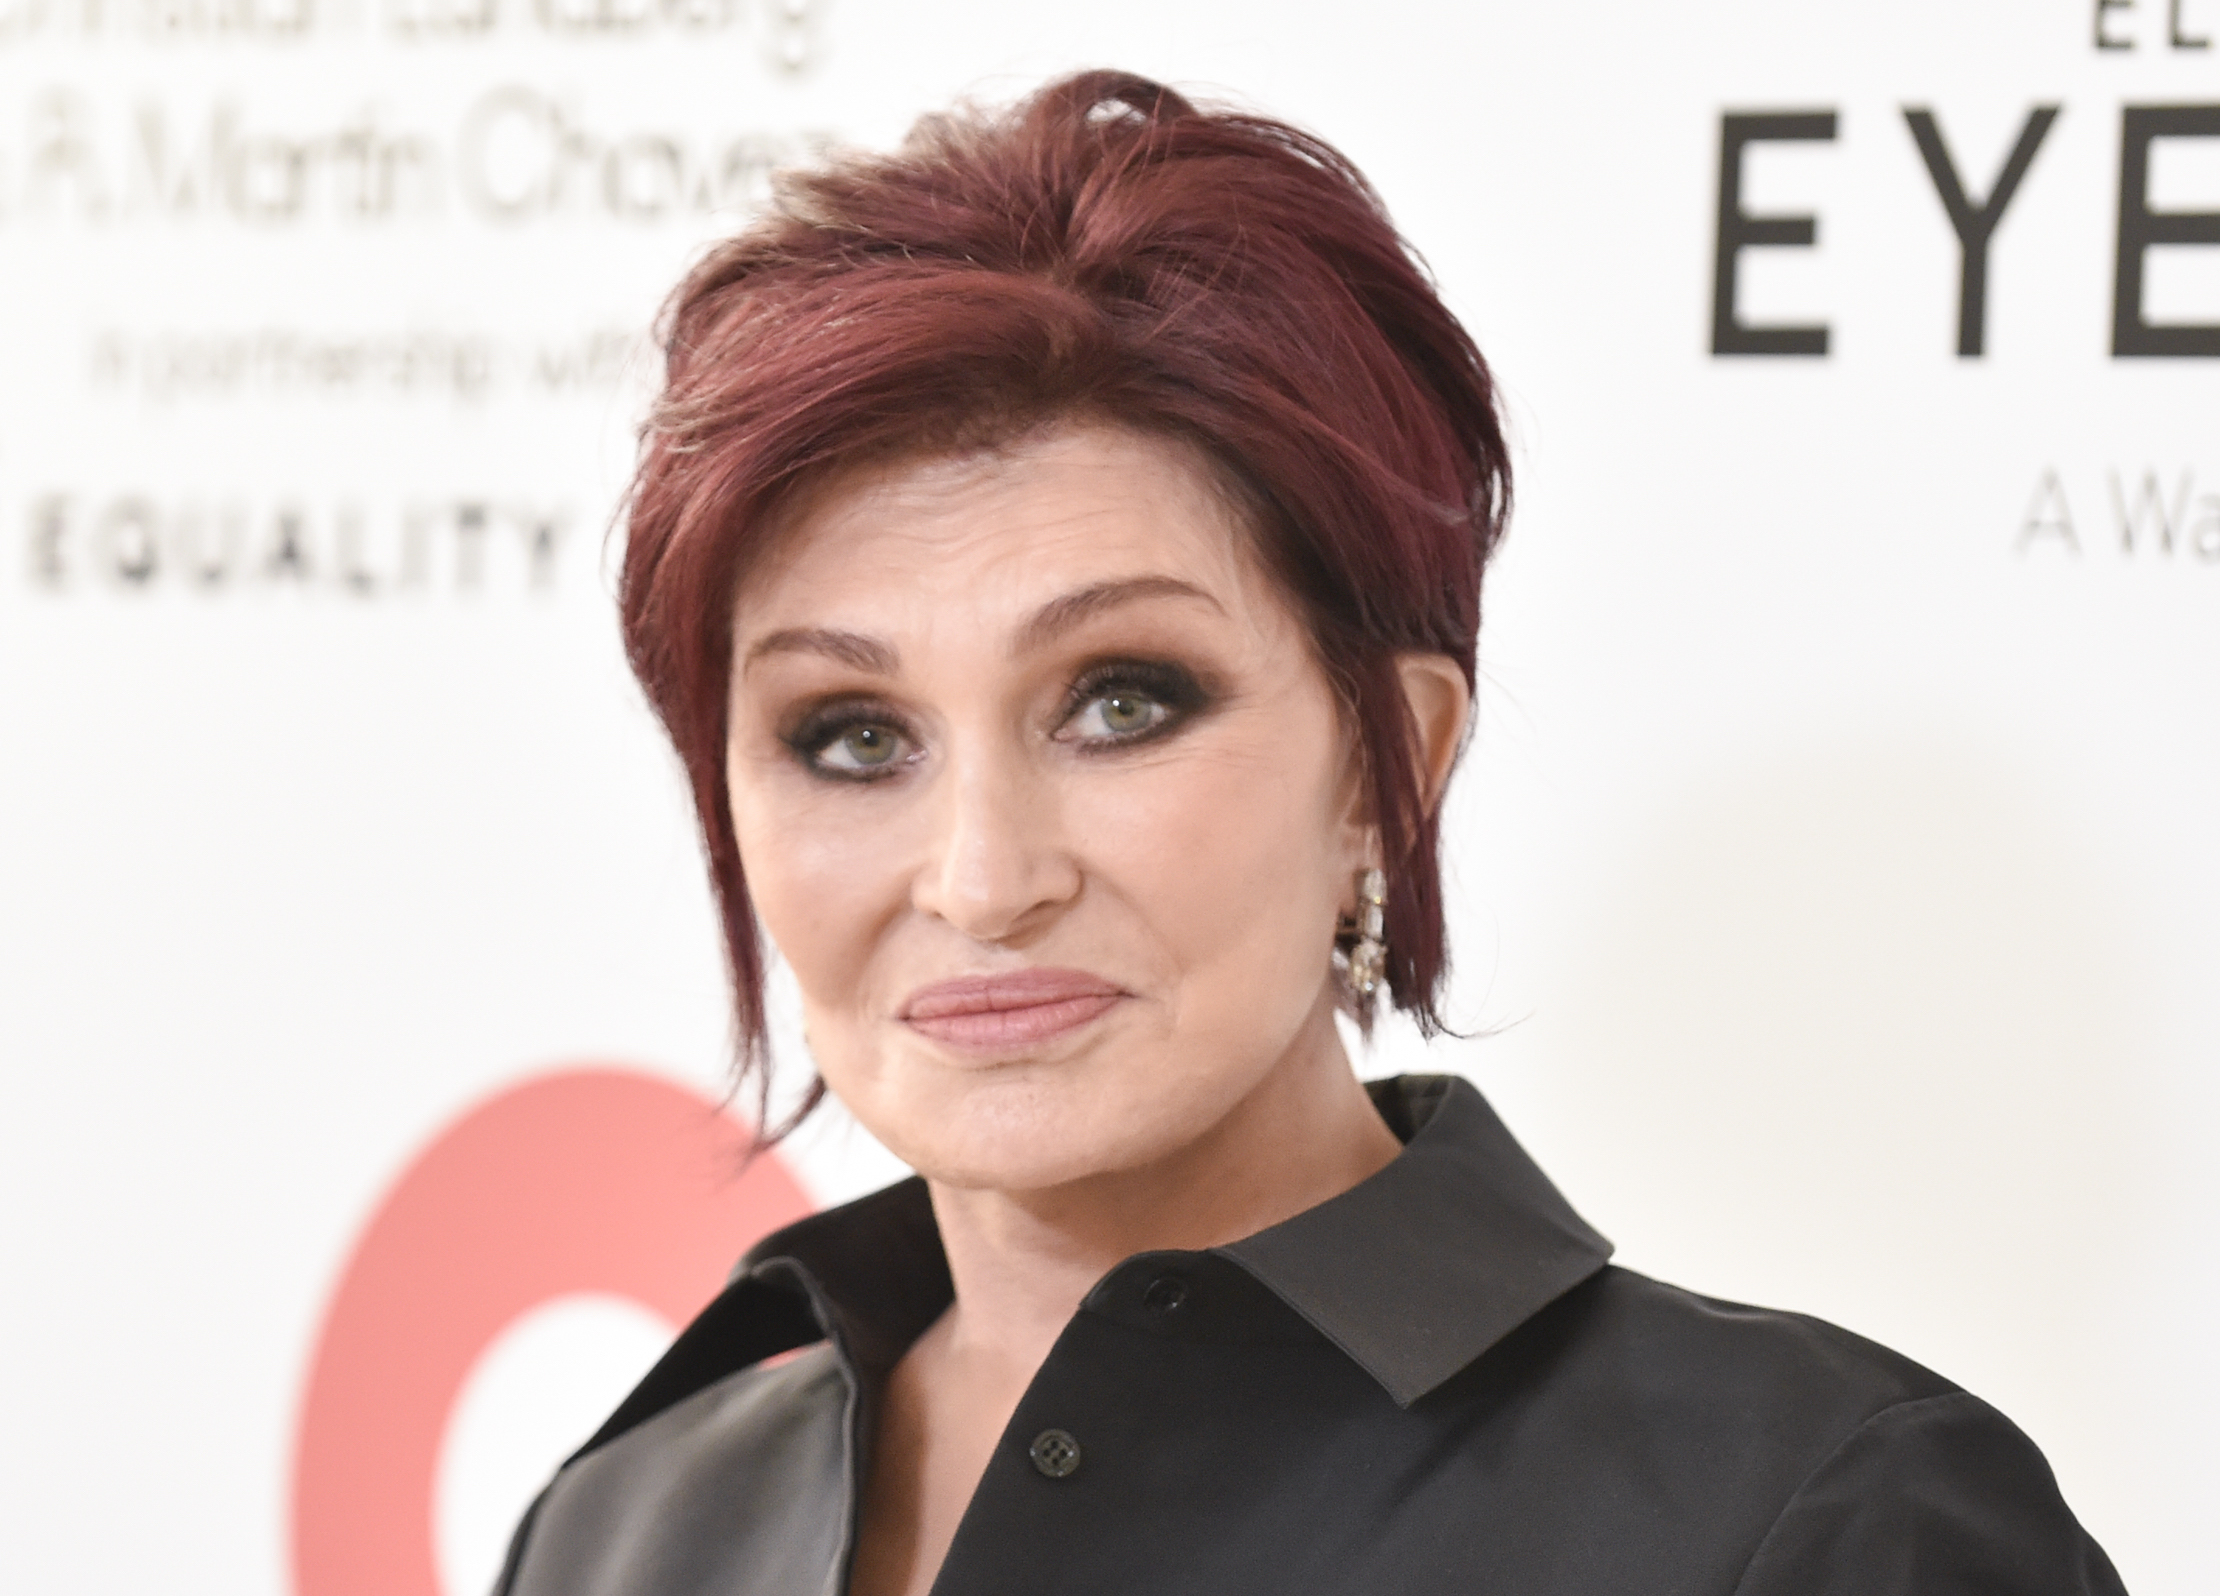 ‘Frightens Me’: Sharon Osbourne, Other Hollywood Stars Say They Regret Getting Plastic Surgery